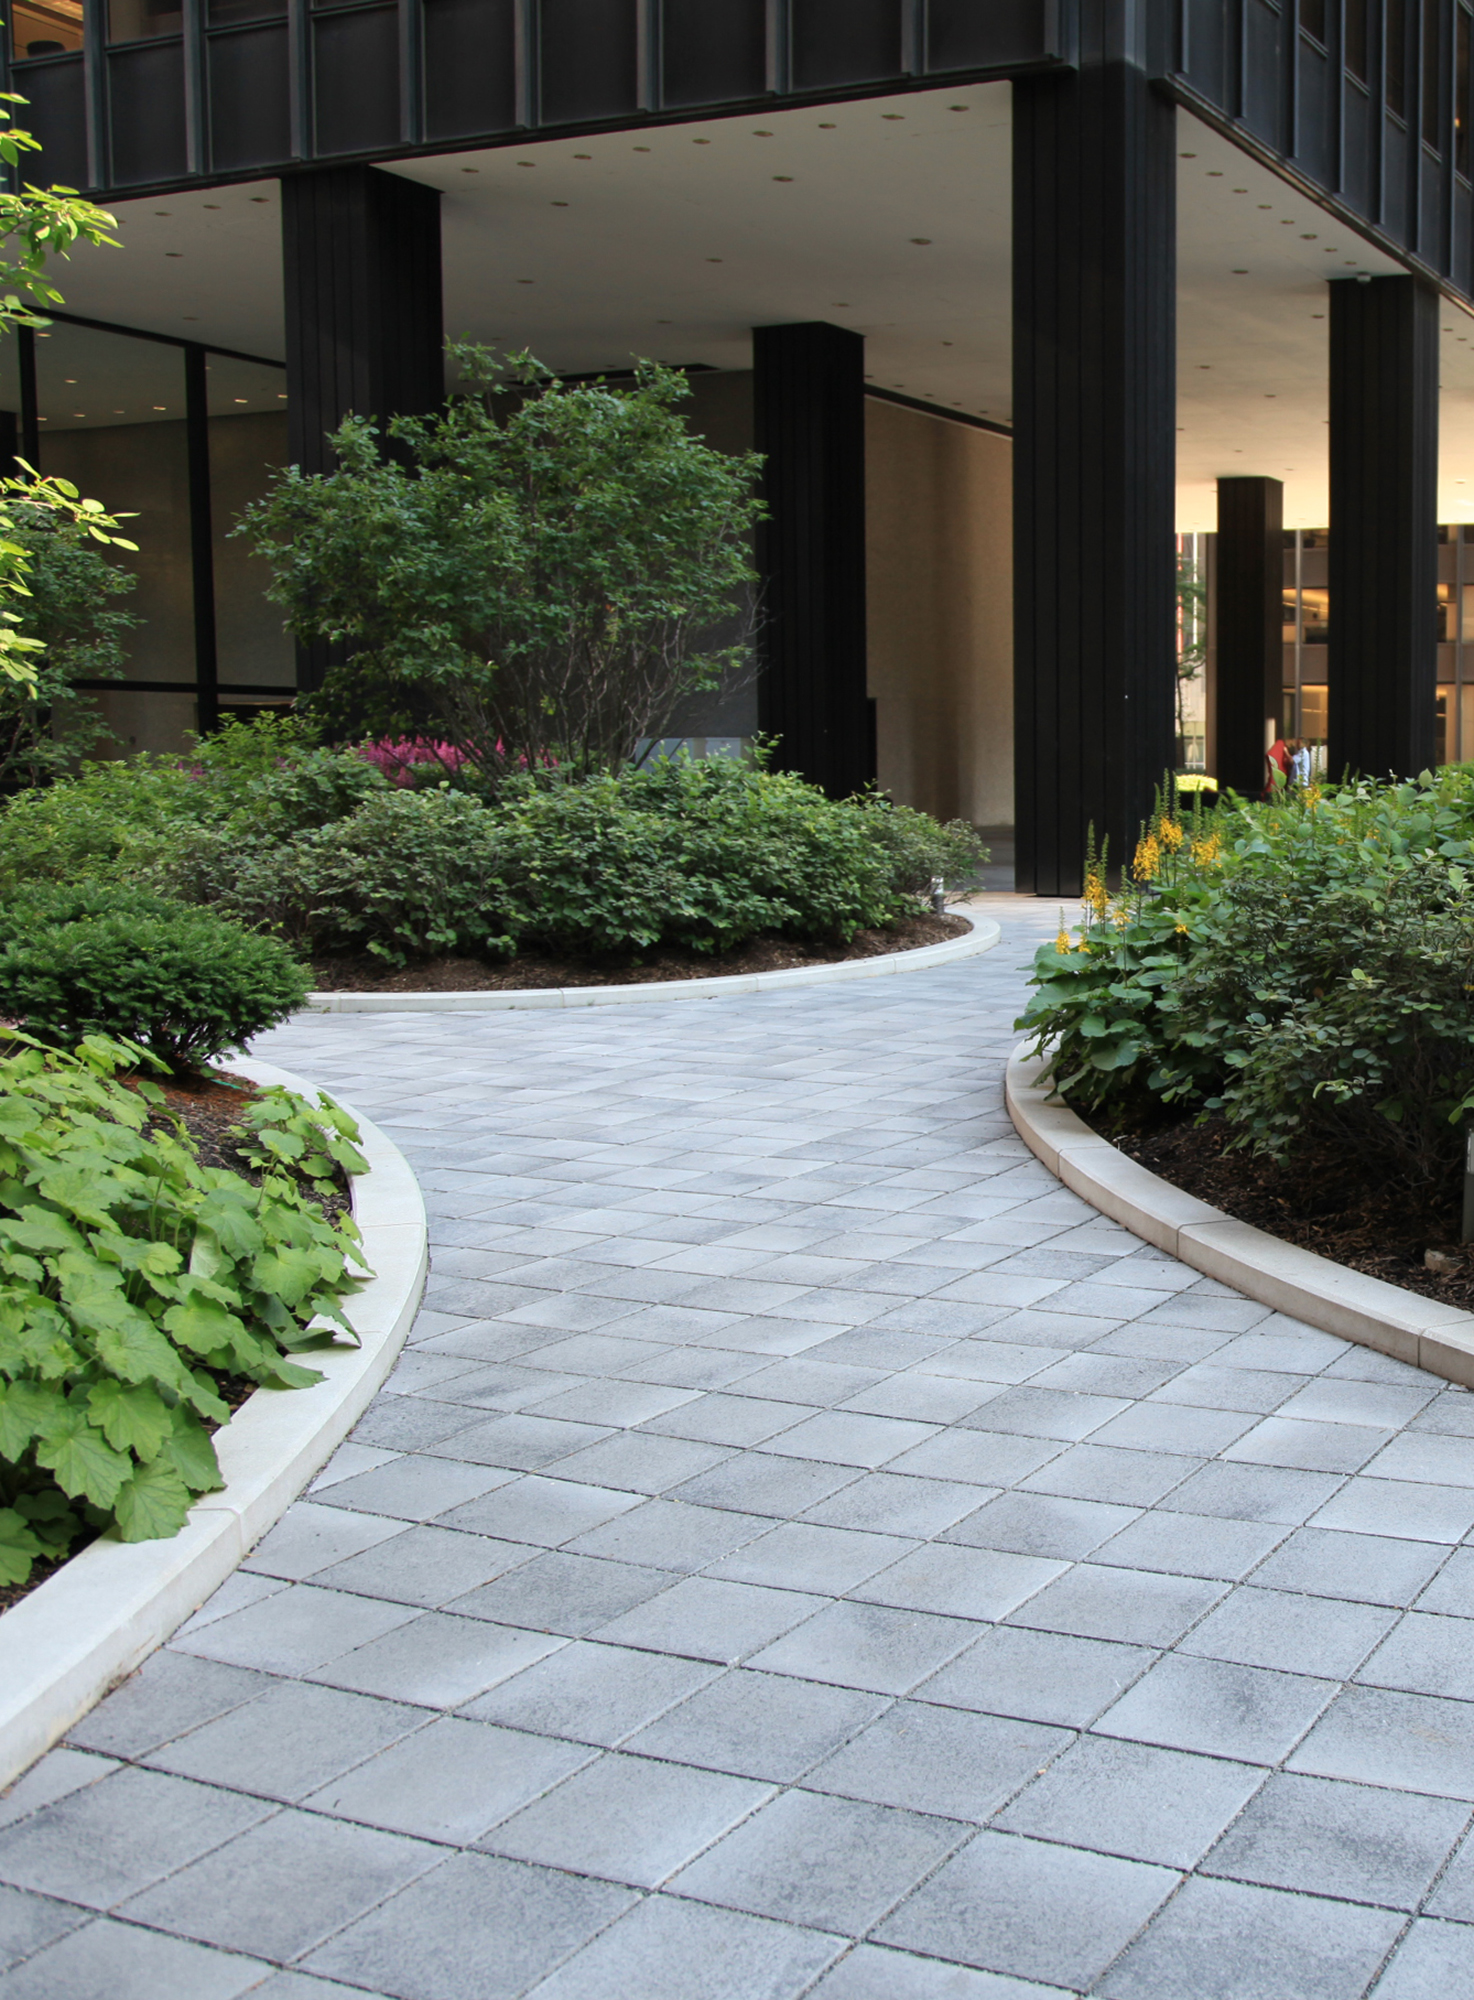 The entrance to a condominium roof deck features Unilock Umbriano pavers in a Custom Grey creating a curvy walkway surrounded by gardens.